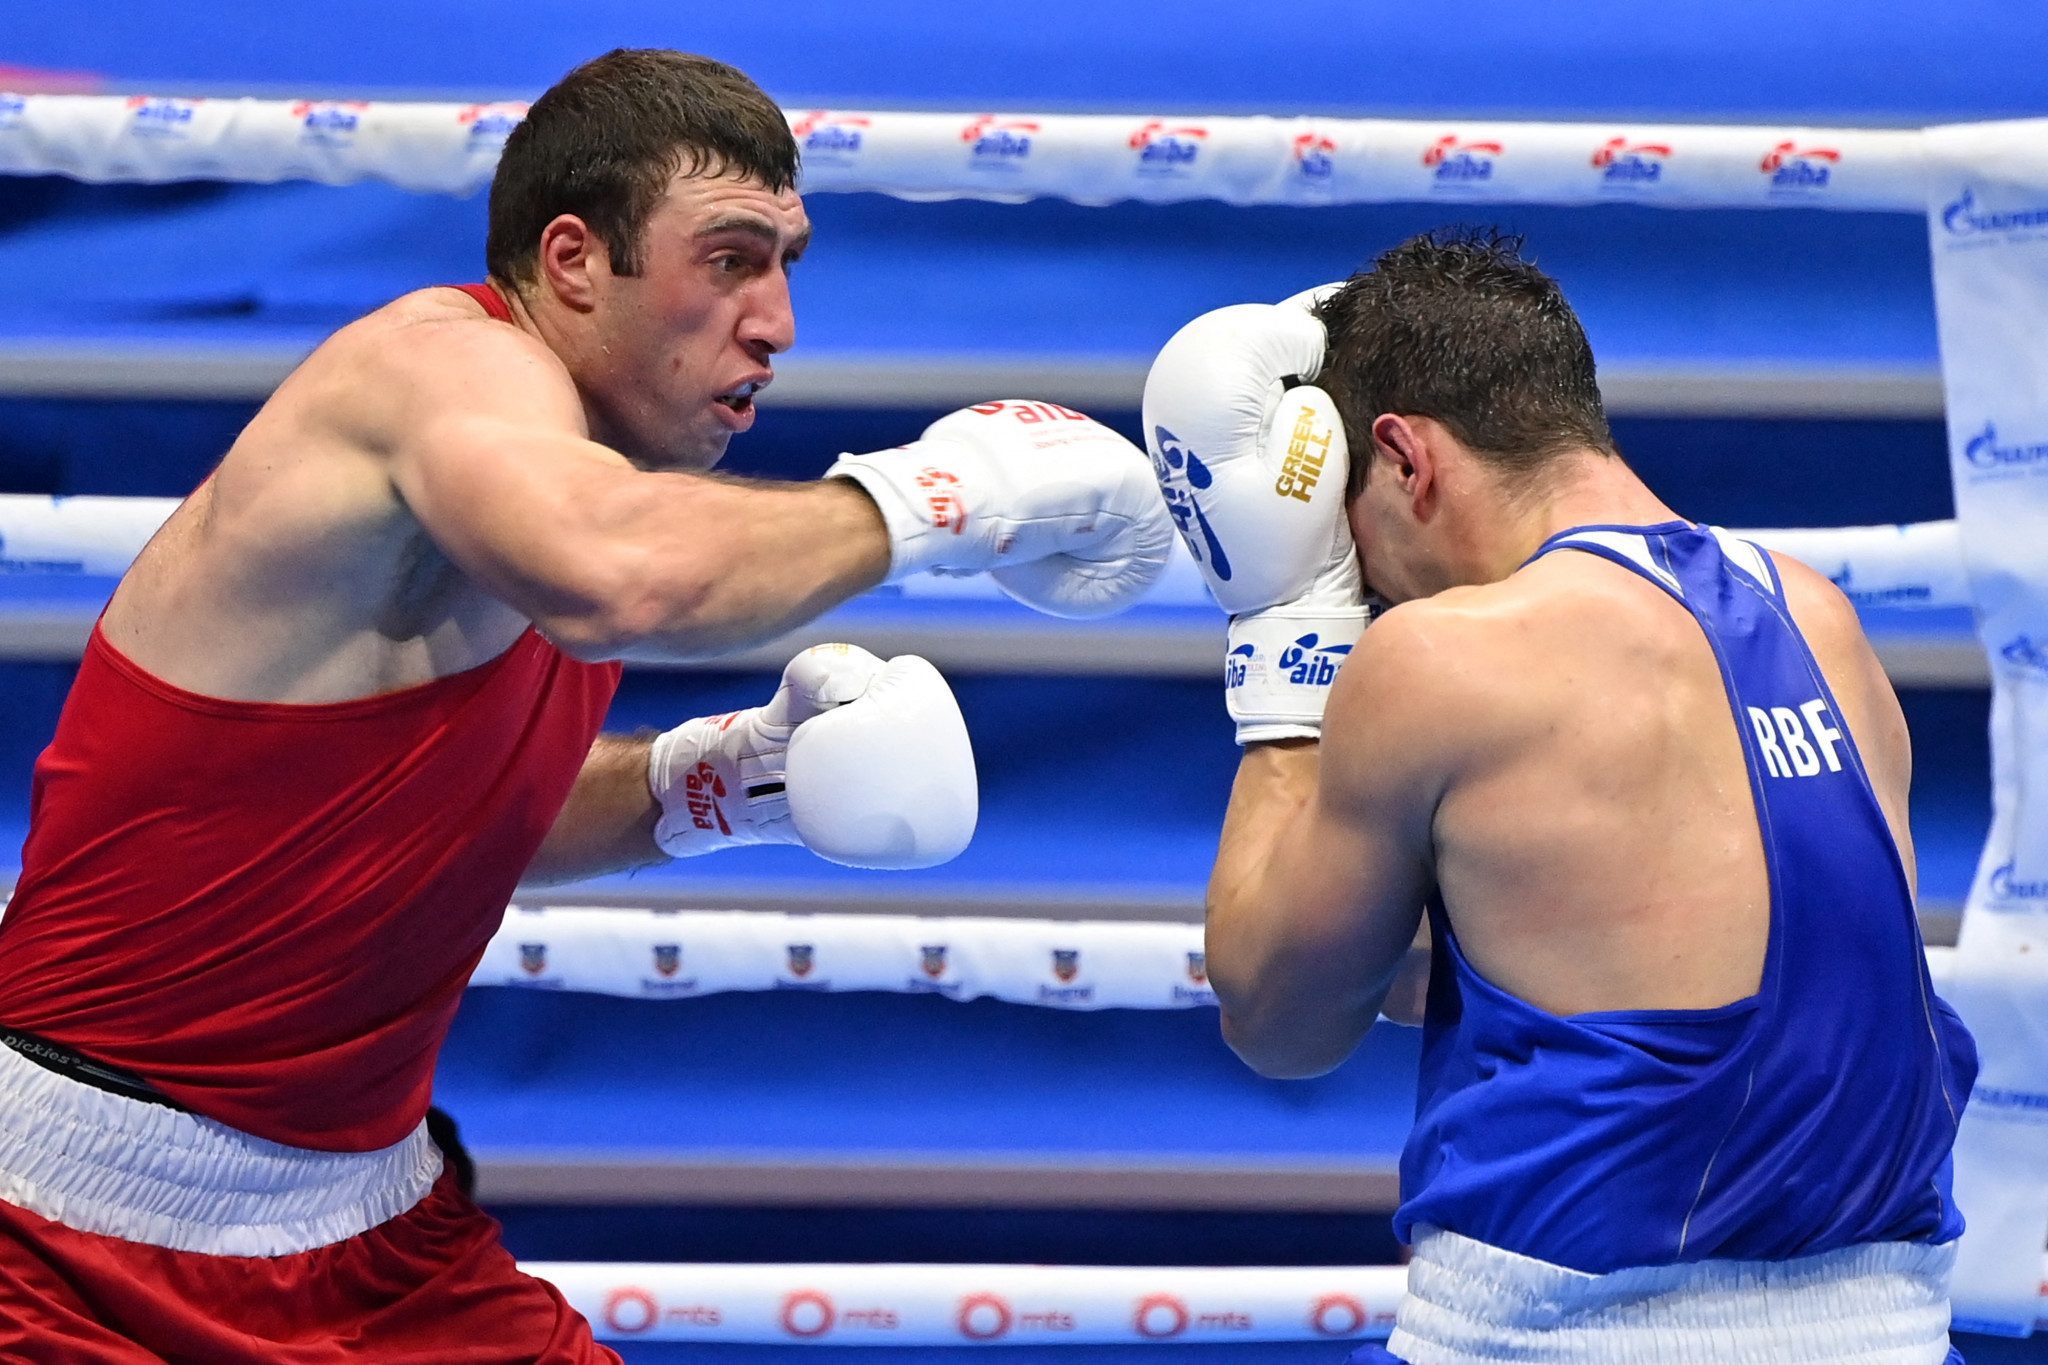 McLaren submits report on protests at European Men’s Elite Boxing Championships to IBA